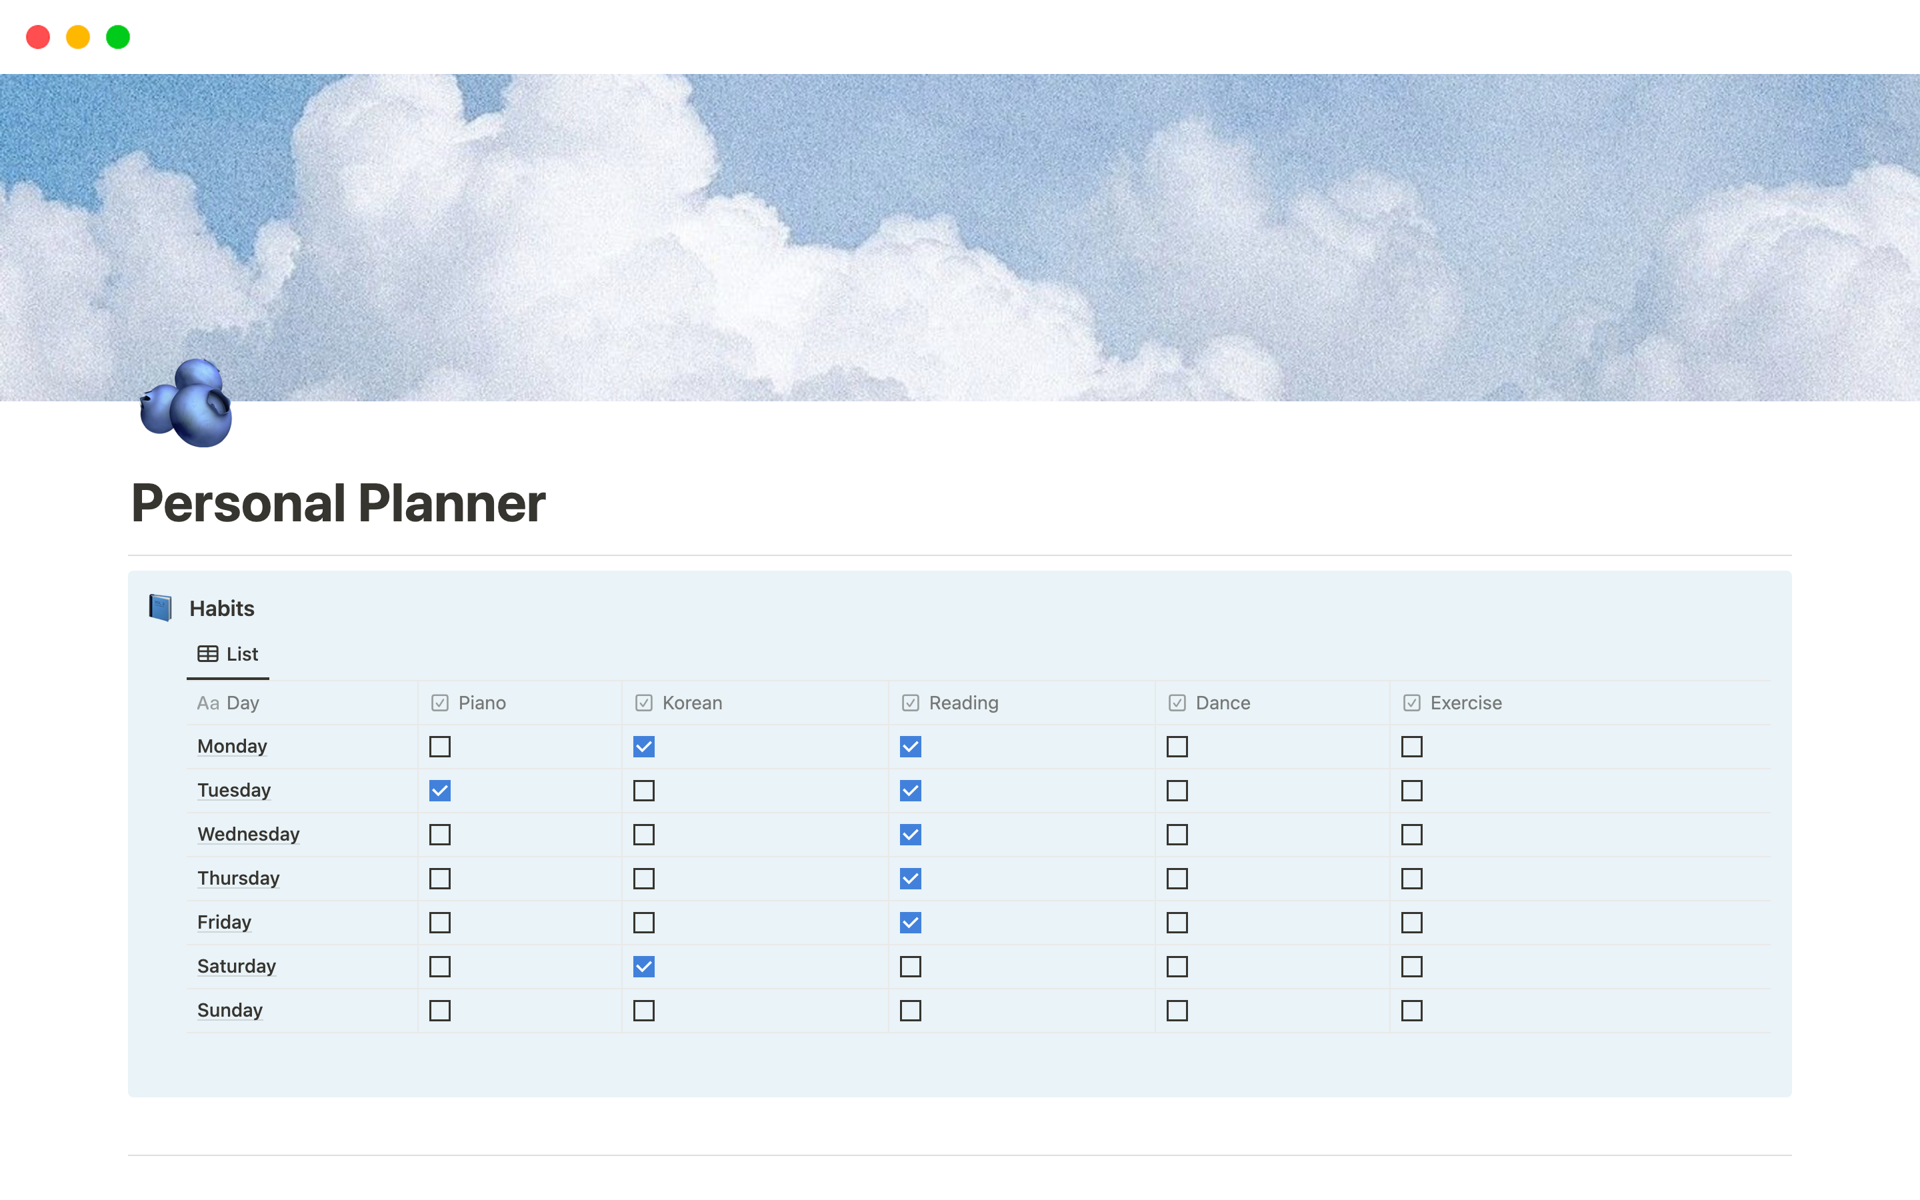 Just a simple personal planner for everyday life!